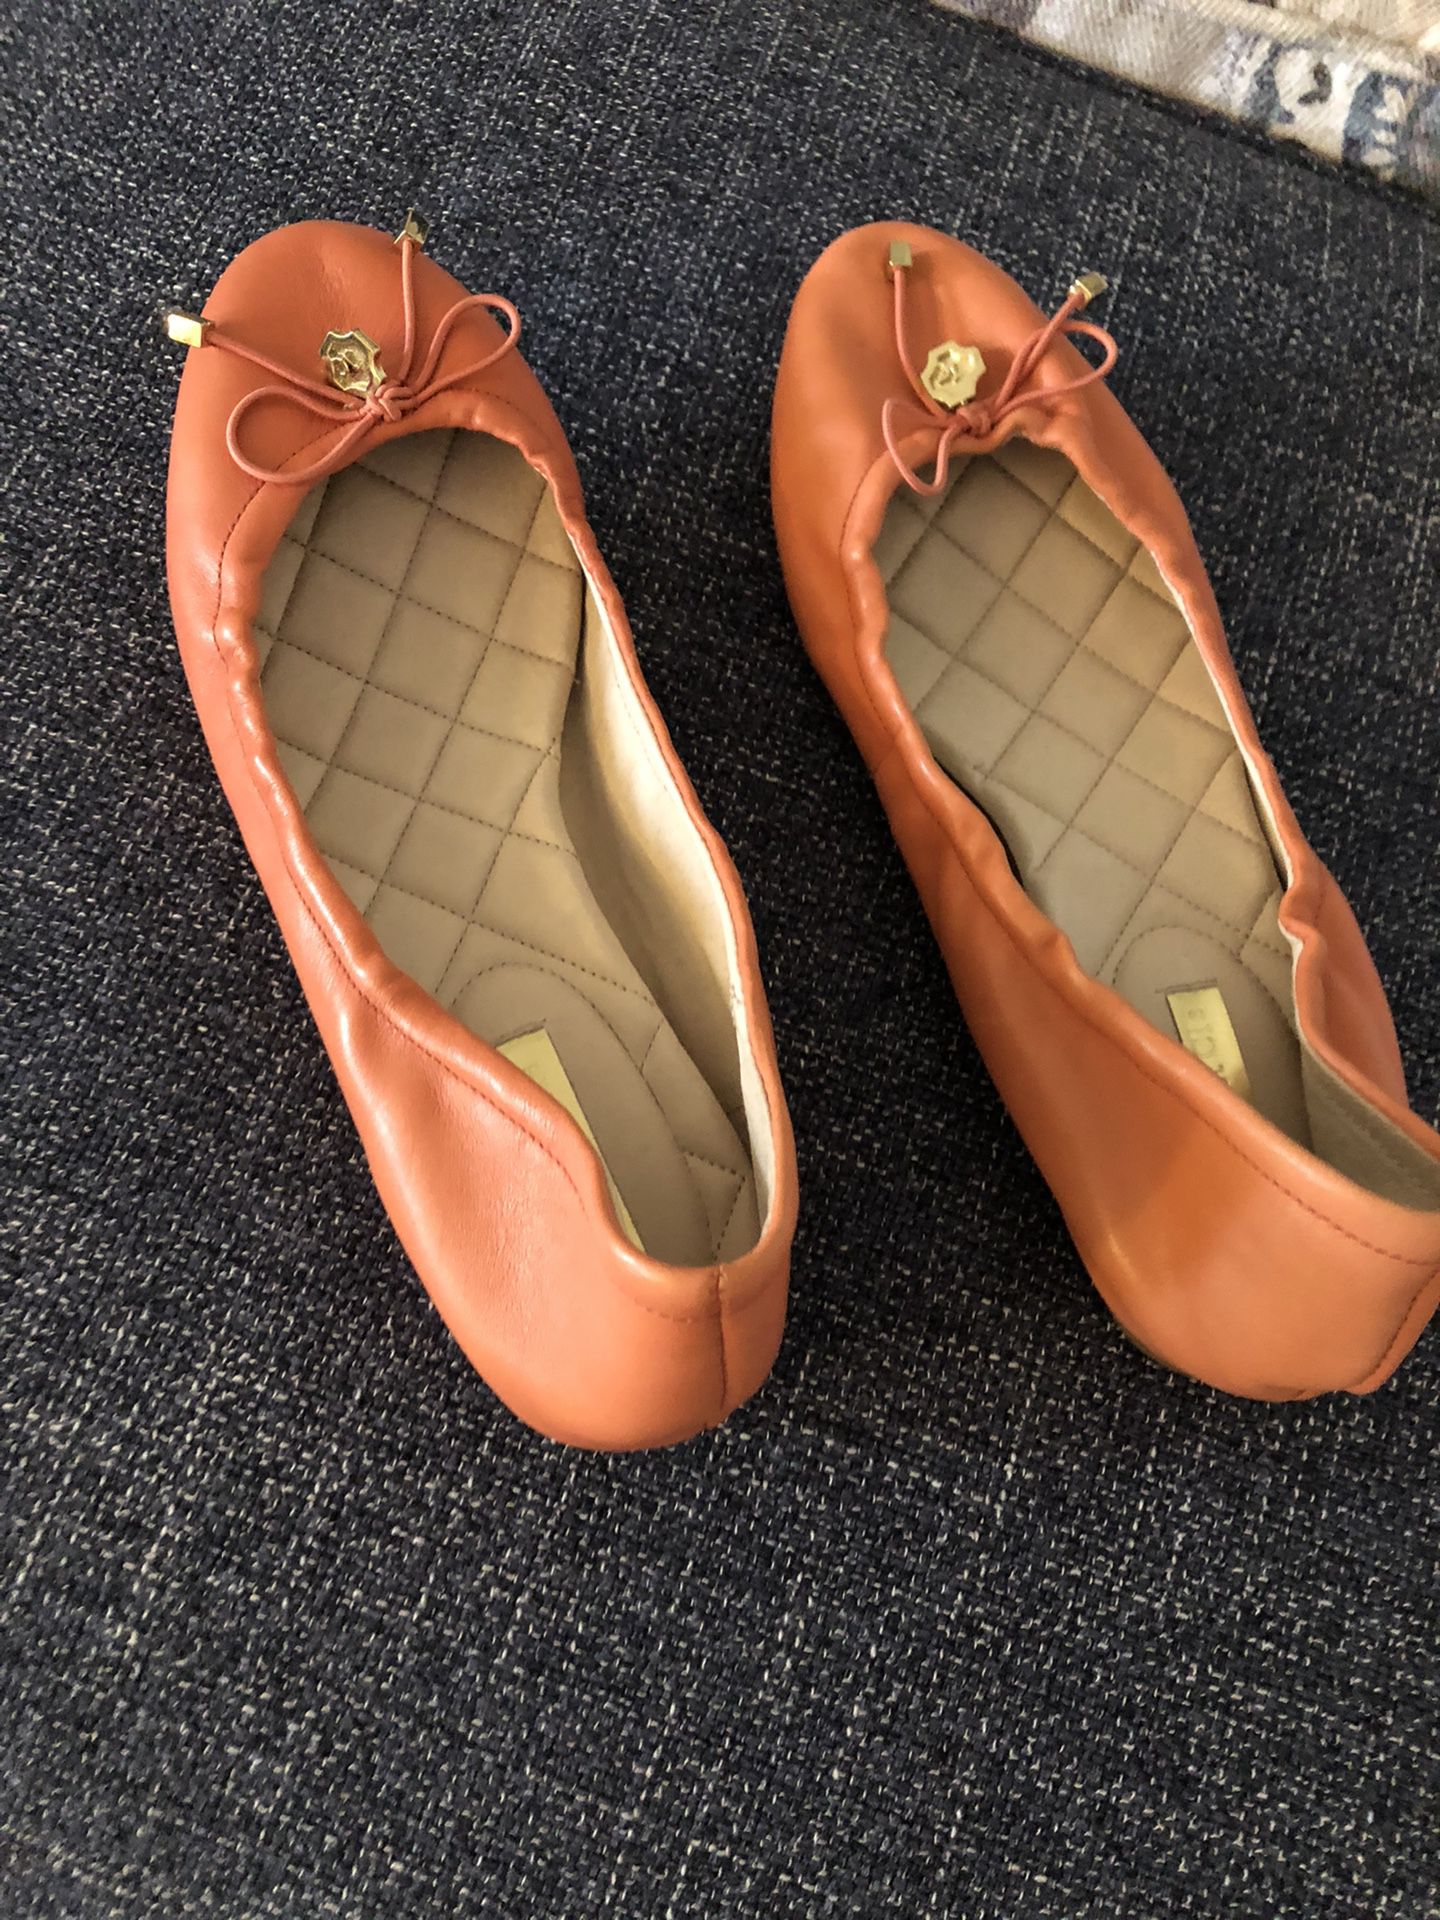 Louise Et cie leather boots size 7.5 for Sale in Redmond, WA - OfferUp